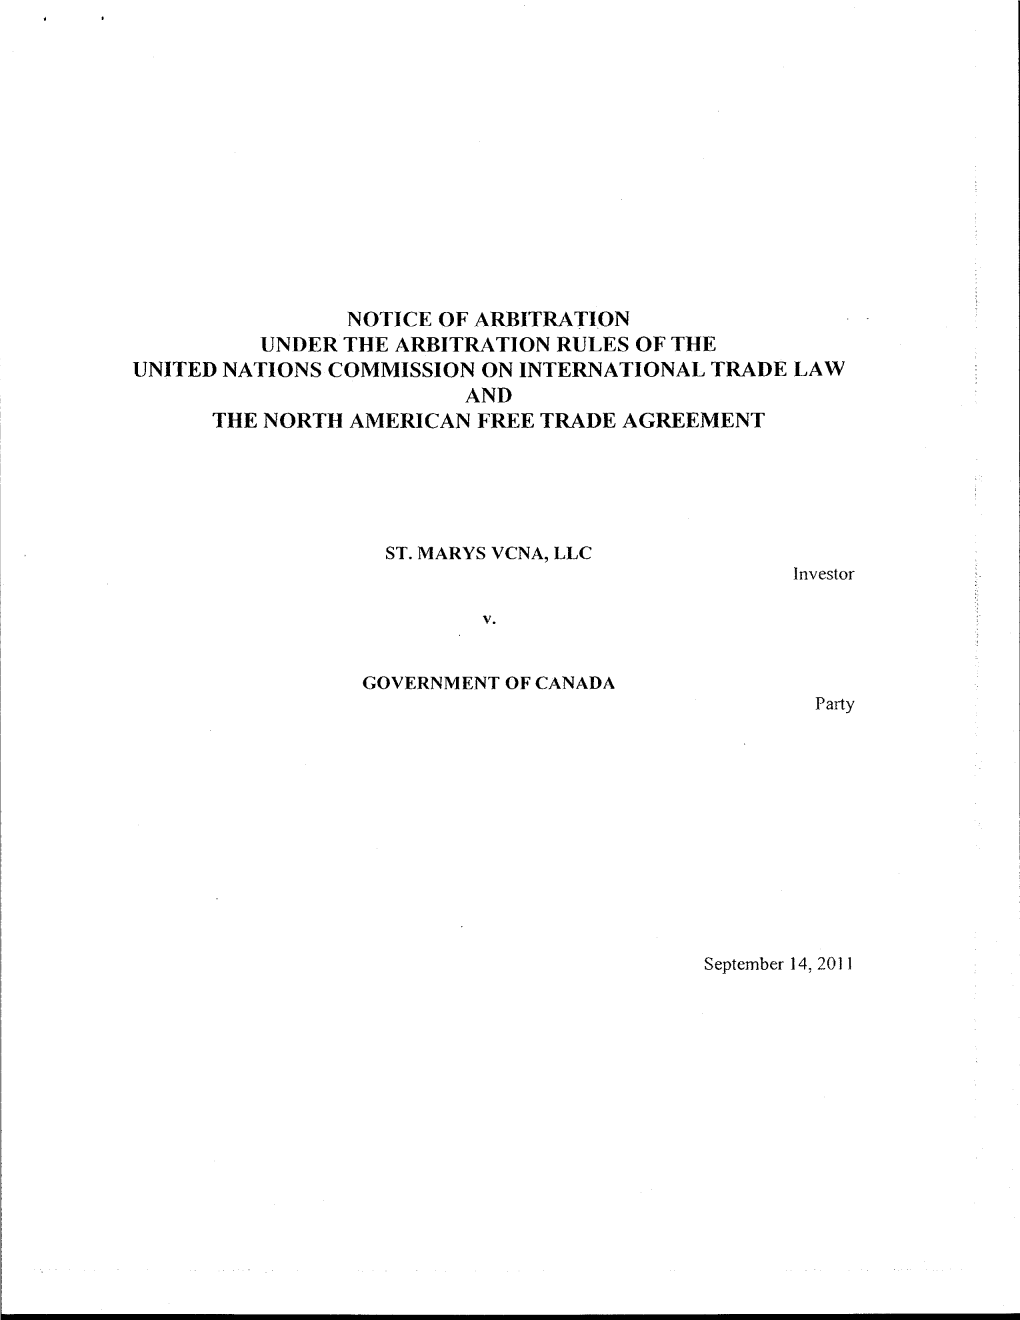 Notice of Arbitration Under the Arbitration Rules of the United Nations Commission on International Trade Law and the North American Free Trade Agreement